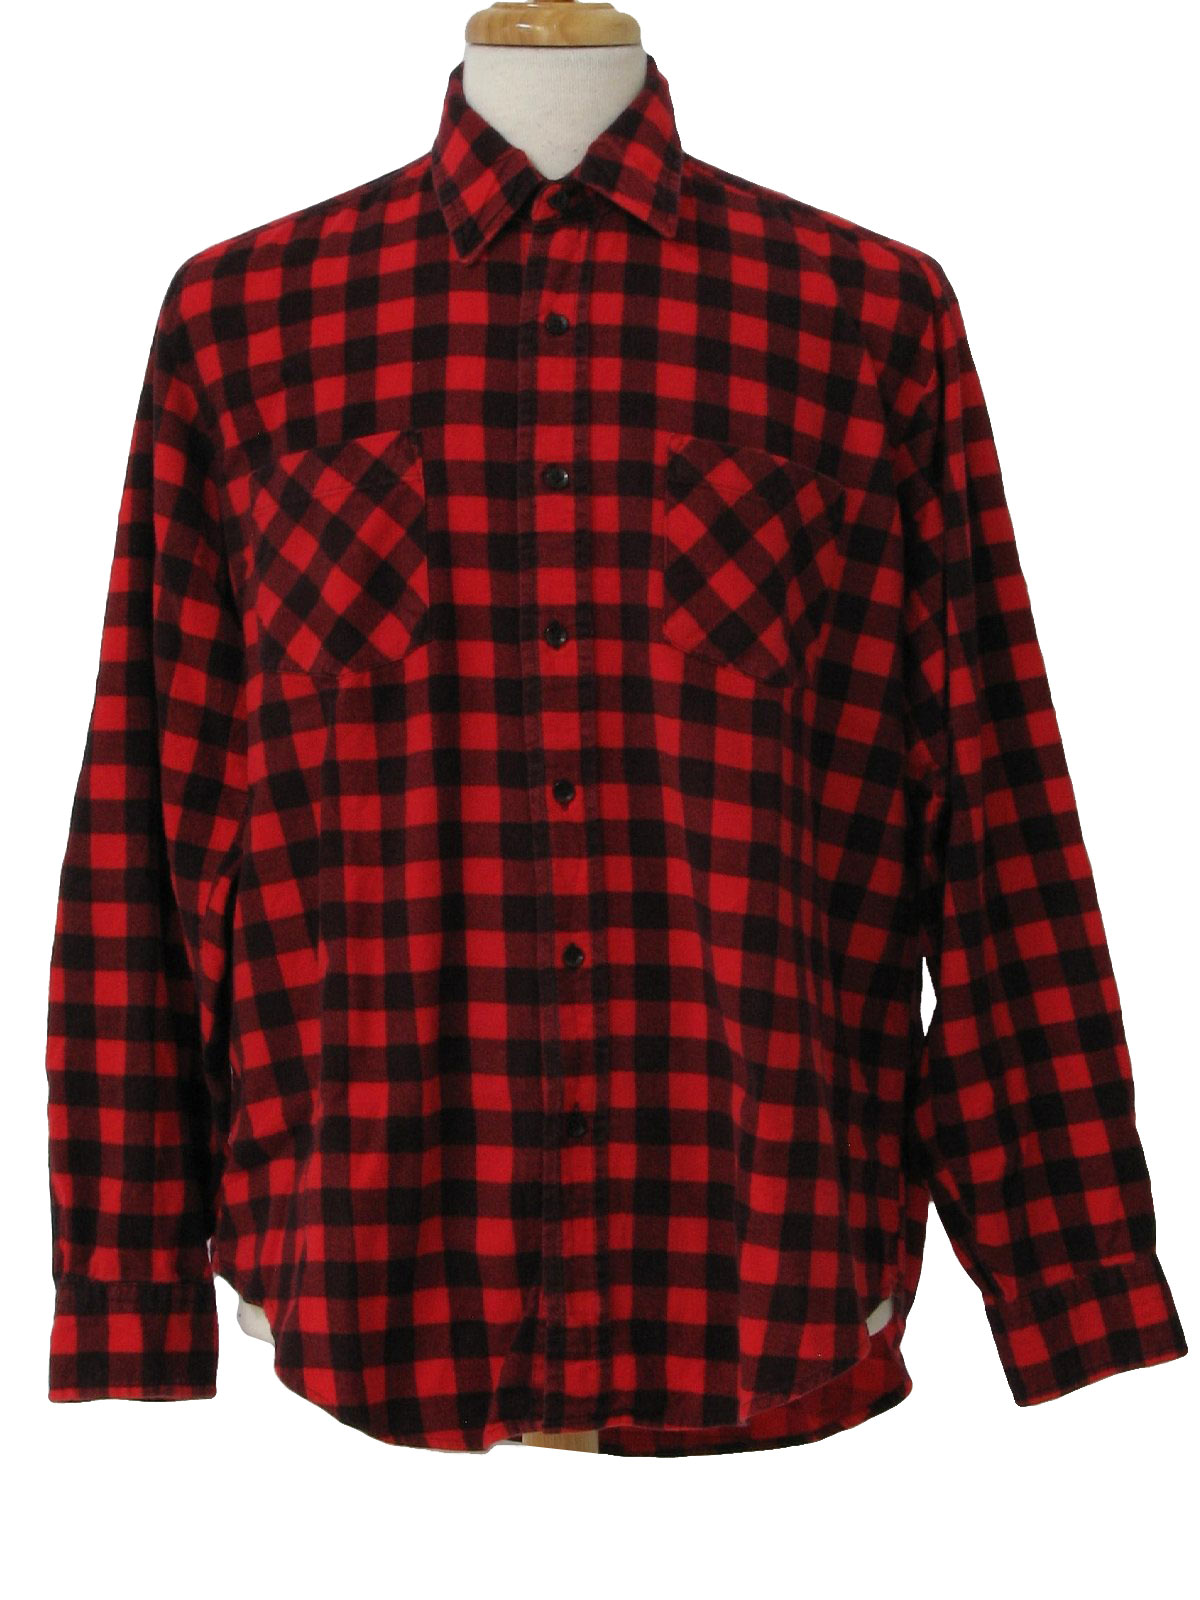 90s Retro Shirt: 90s -Dickies- Mens red and black cotton flannel shirt ...